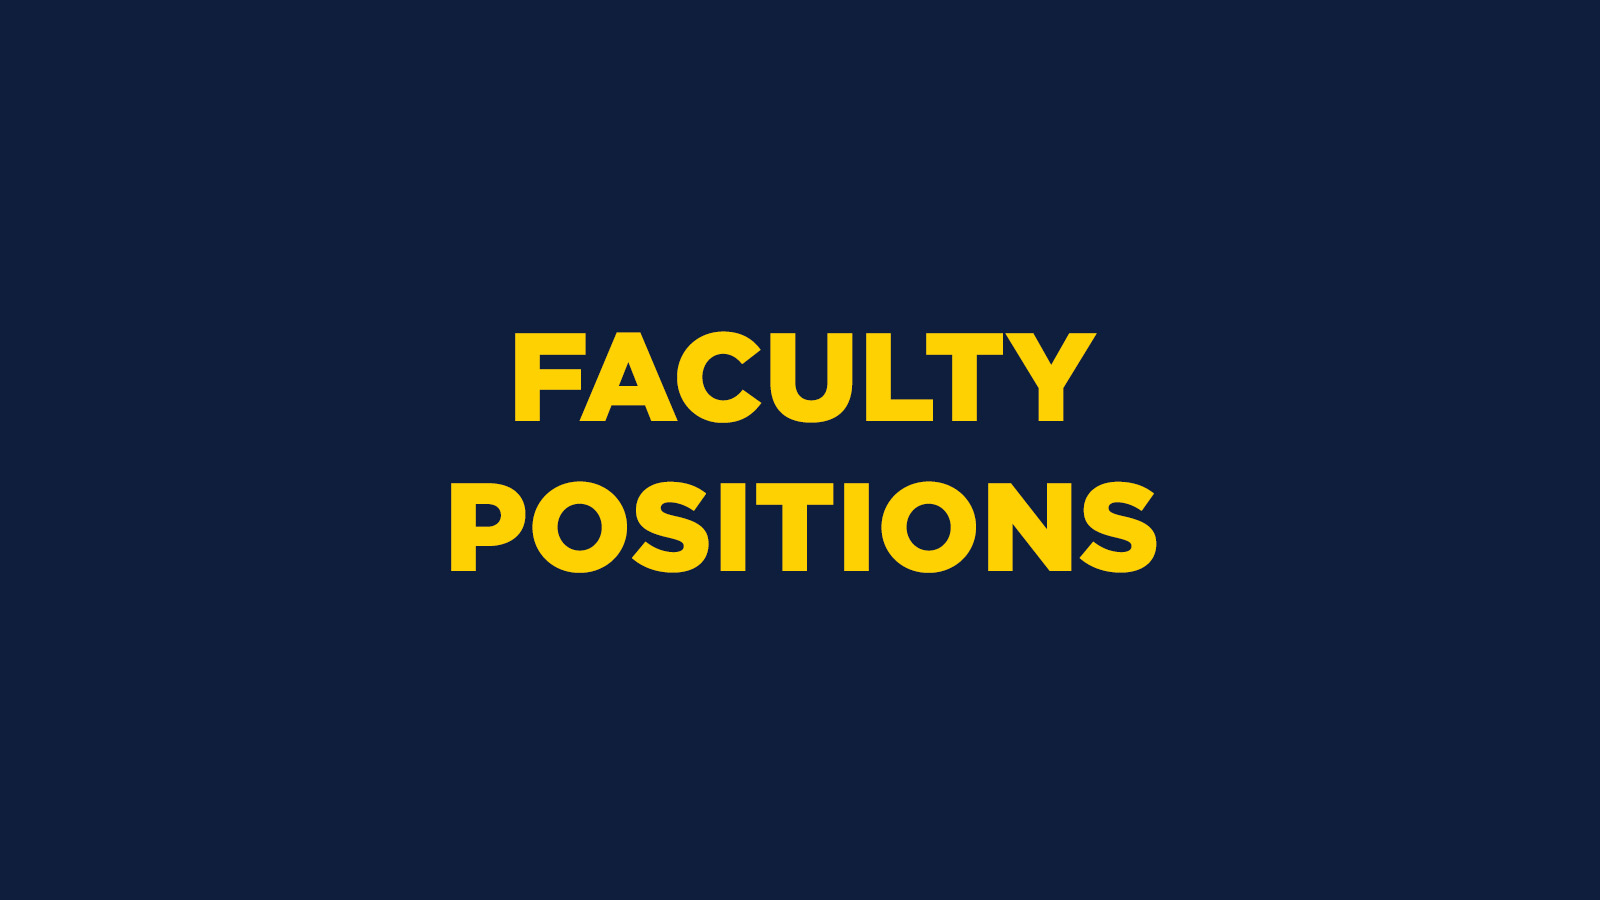 FACULTY POSITIONS